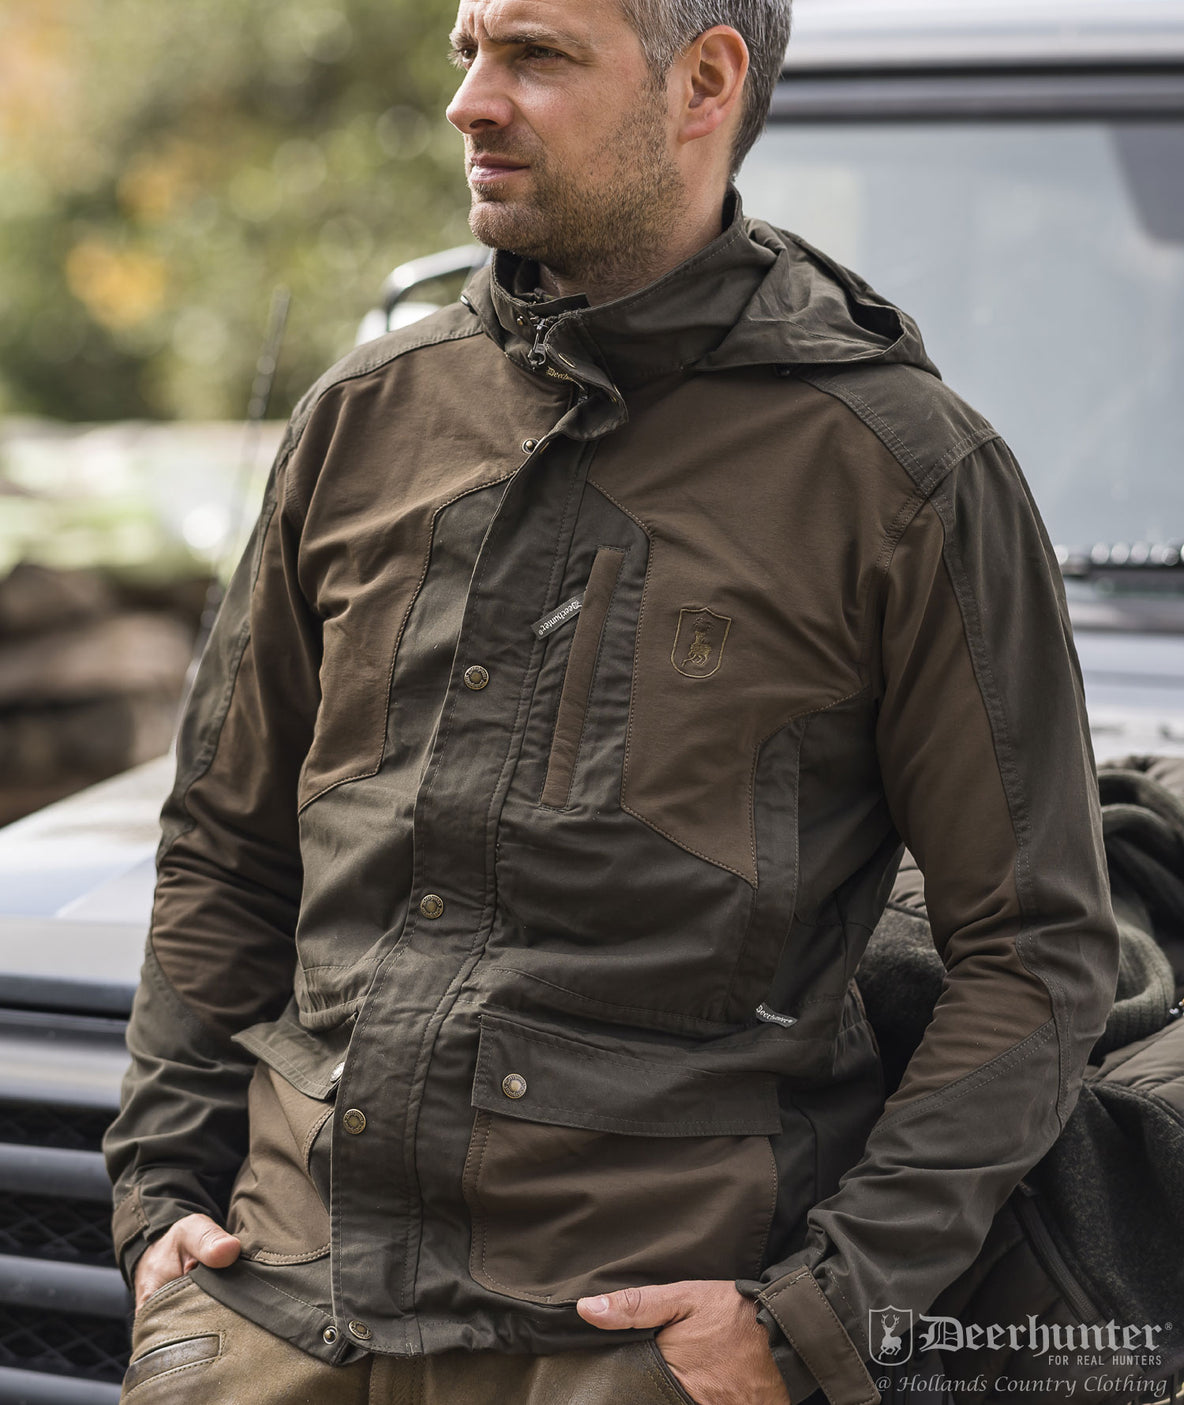 Lightweight, but robust with built in stretch, the Strike jacket by Deerhunter is ideal for country leisure wear